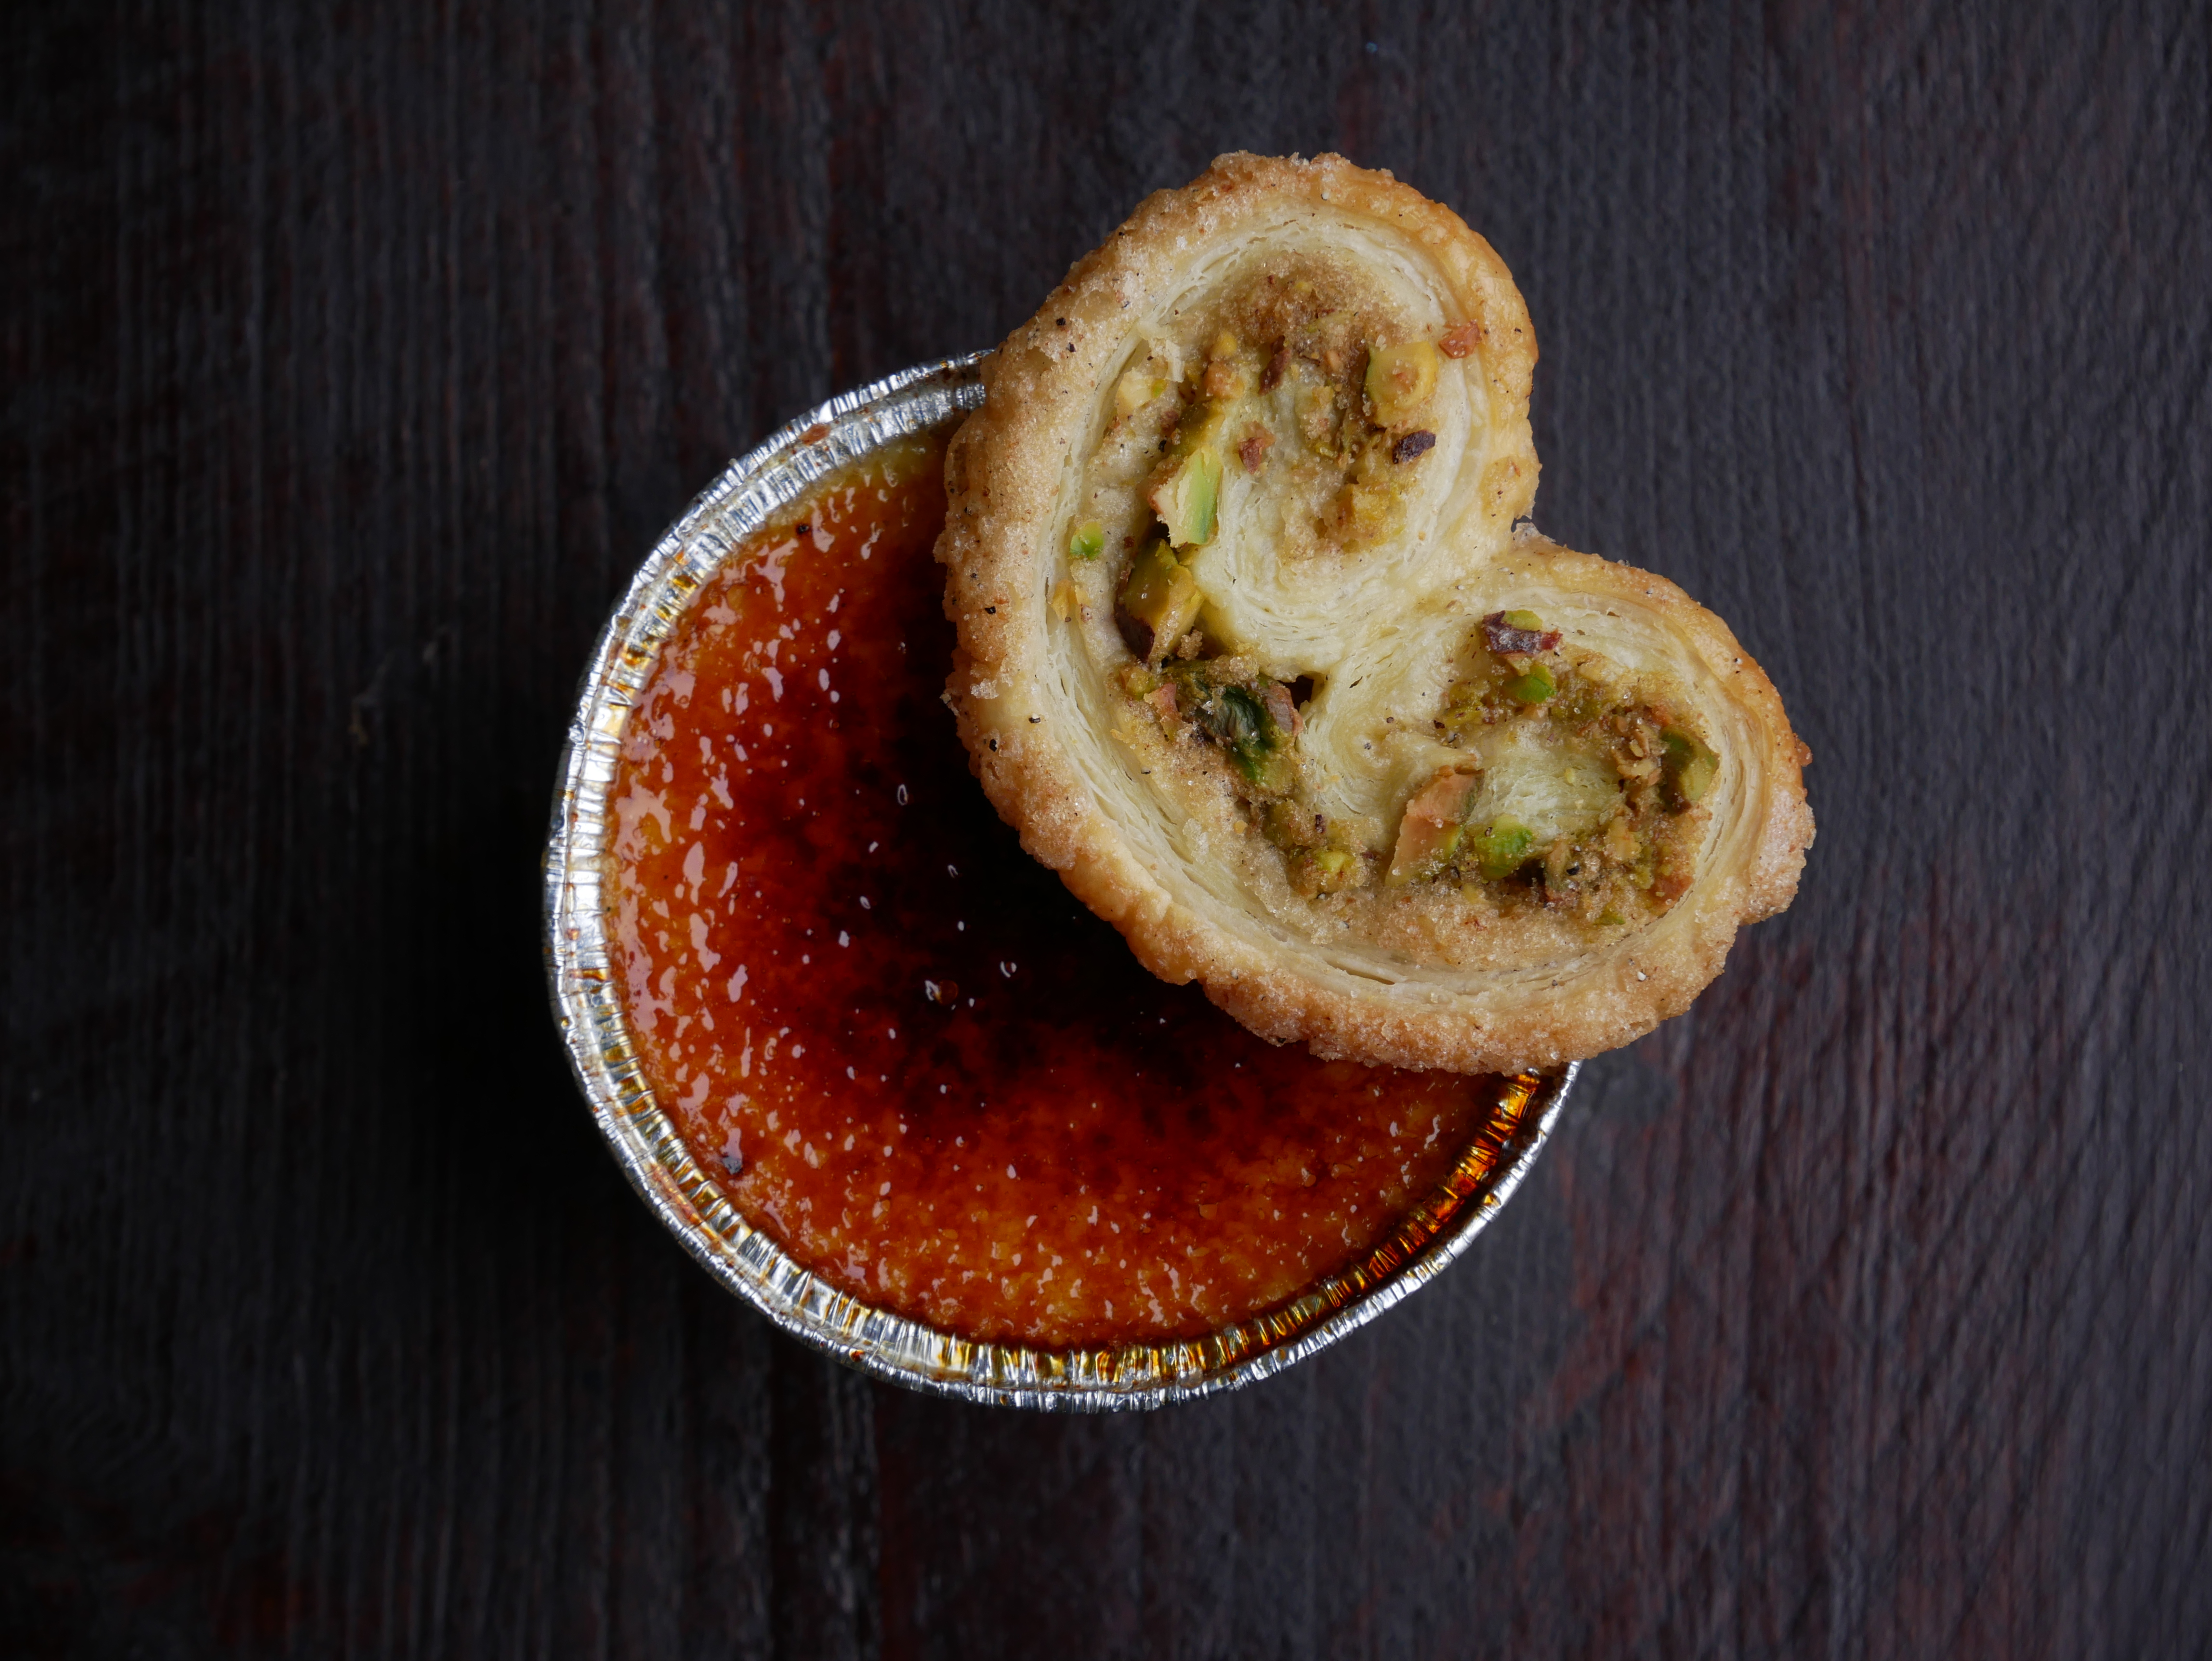 Pistachio palmier topped creme brulee.JPG